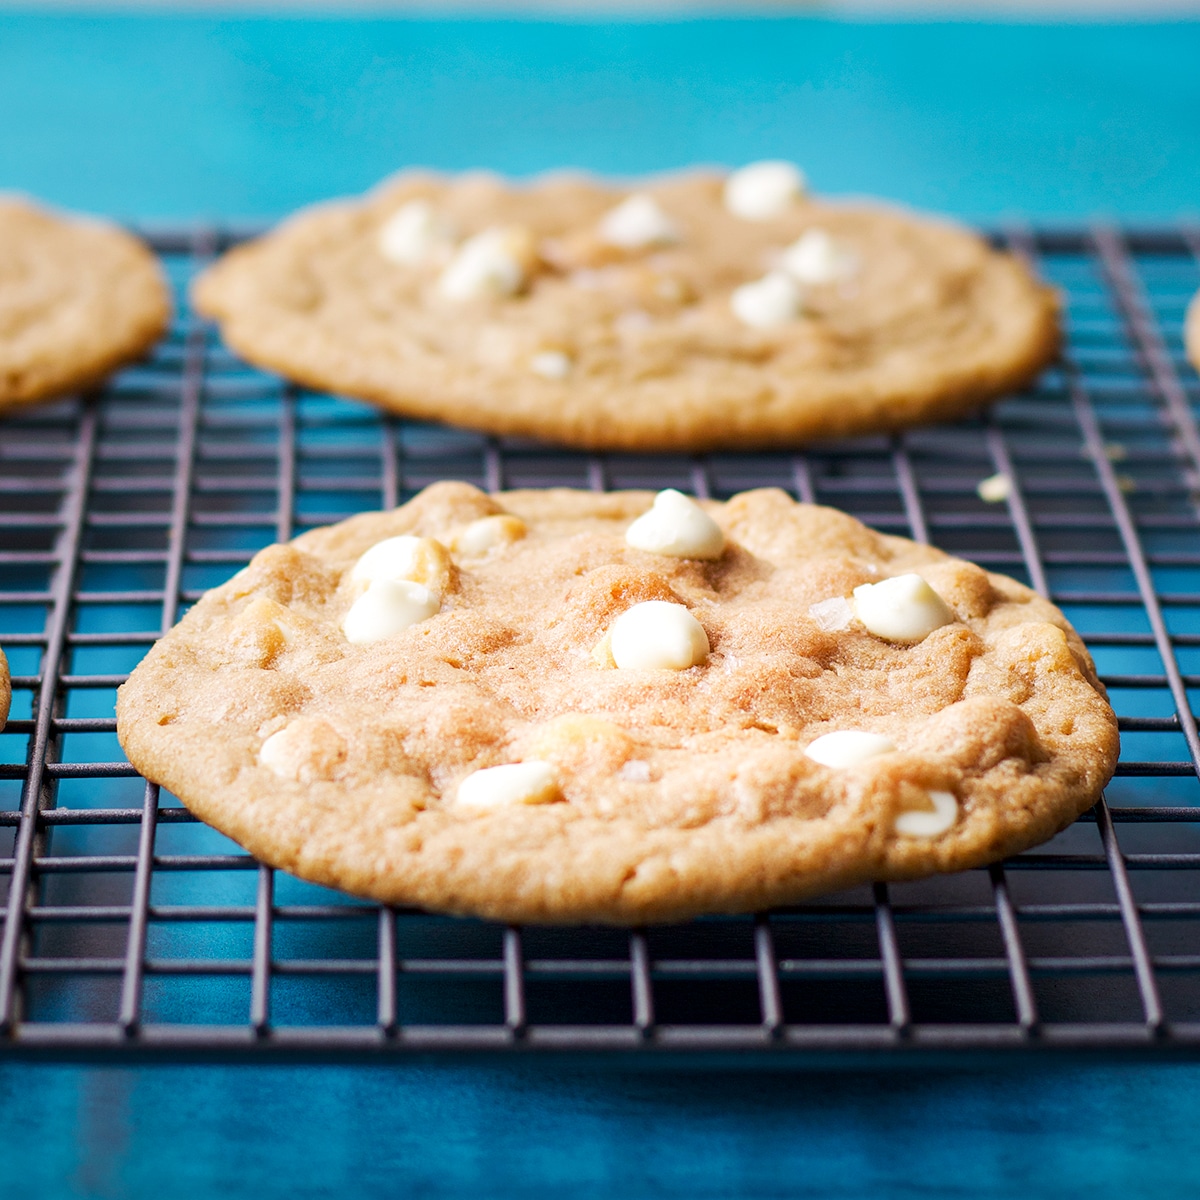 White chocolate chip cookies cooling on a wire baking rack.